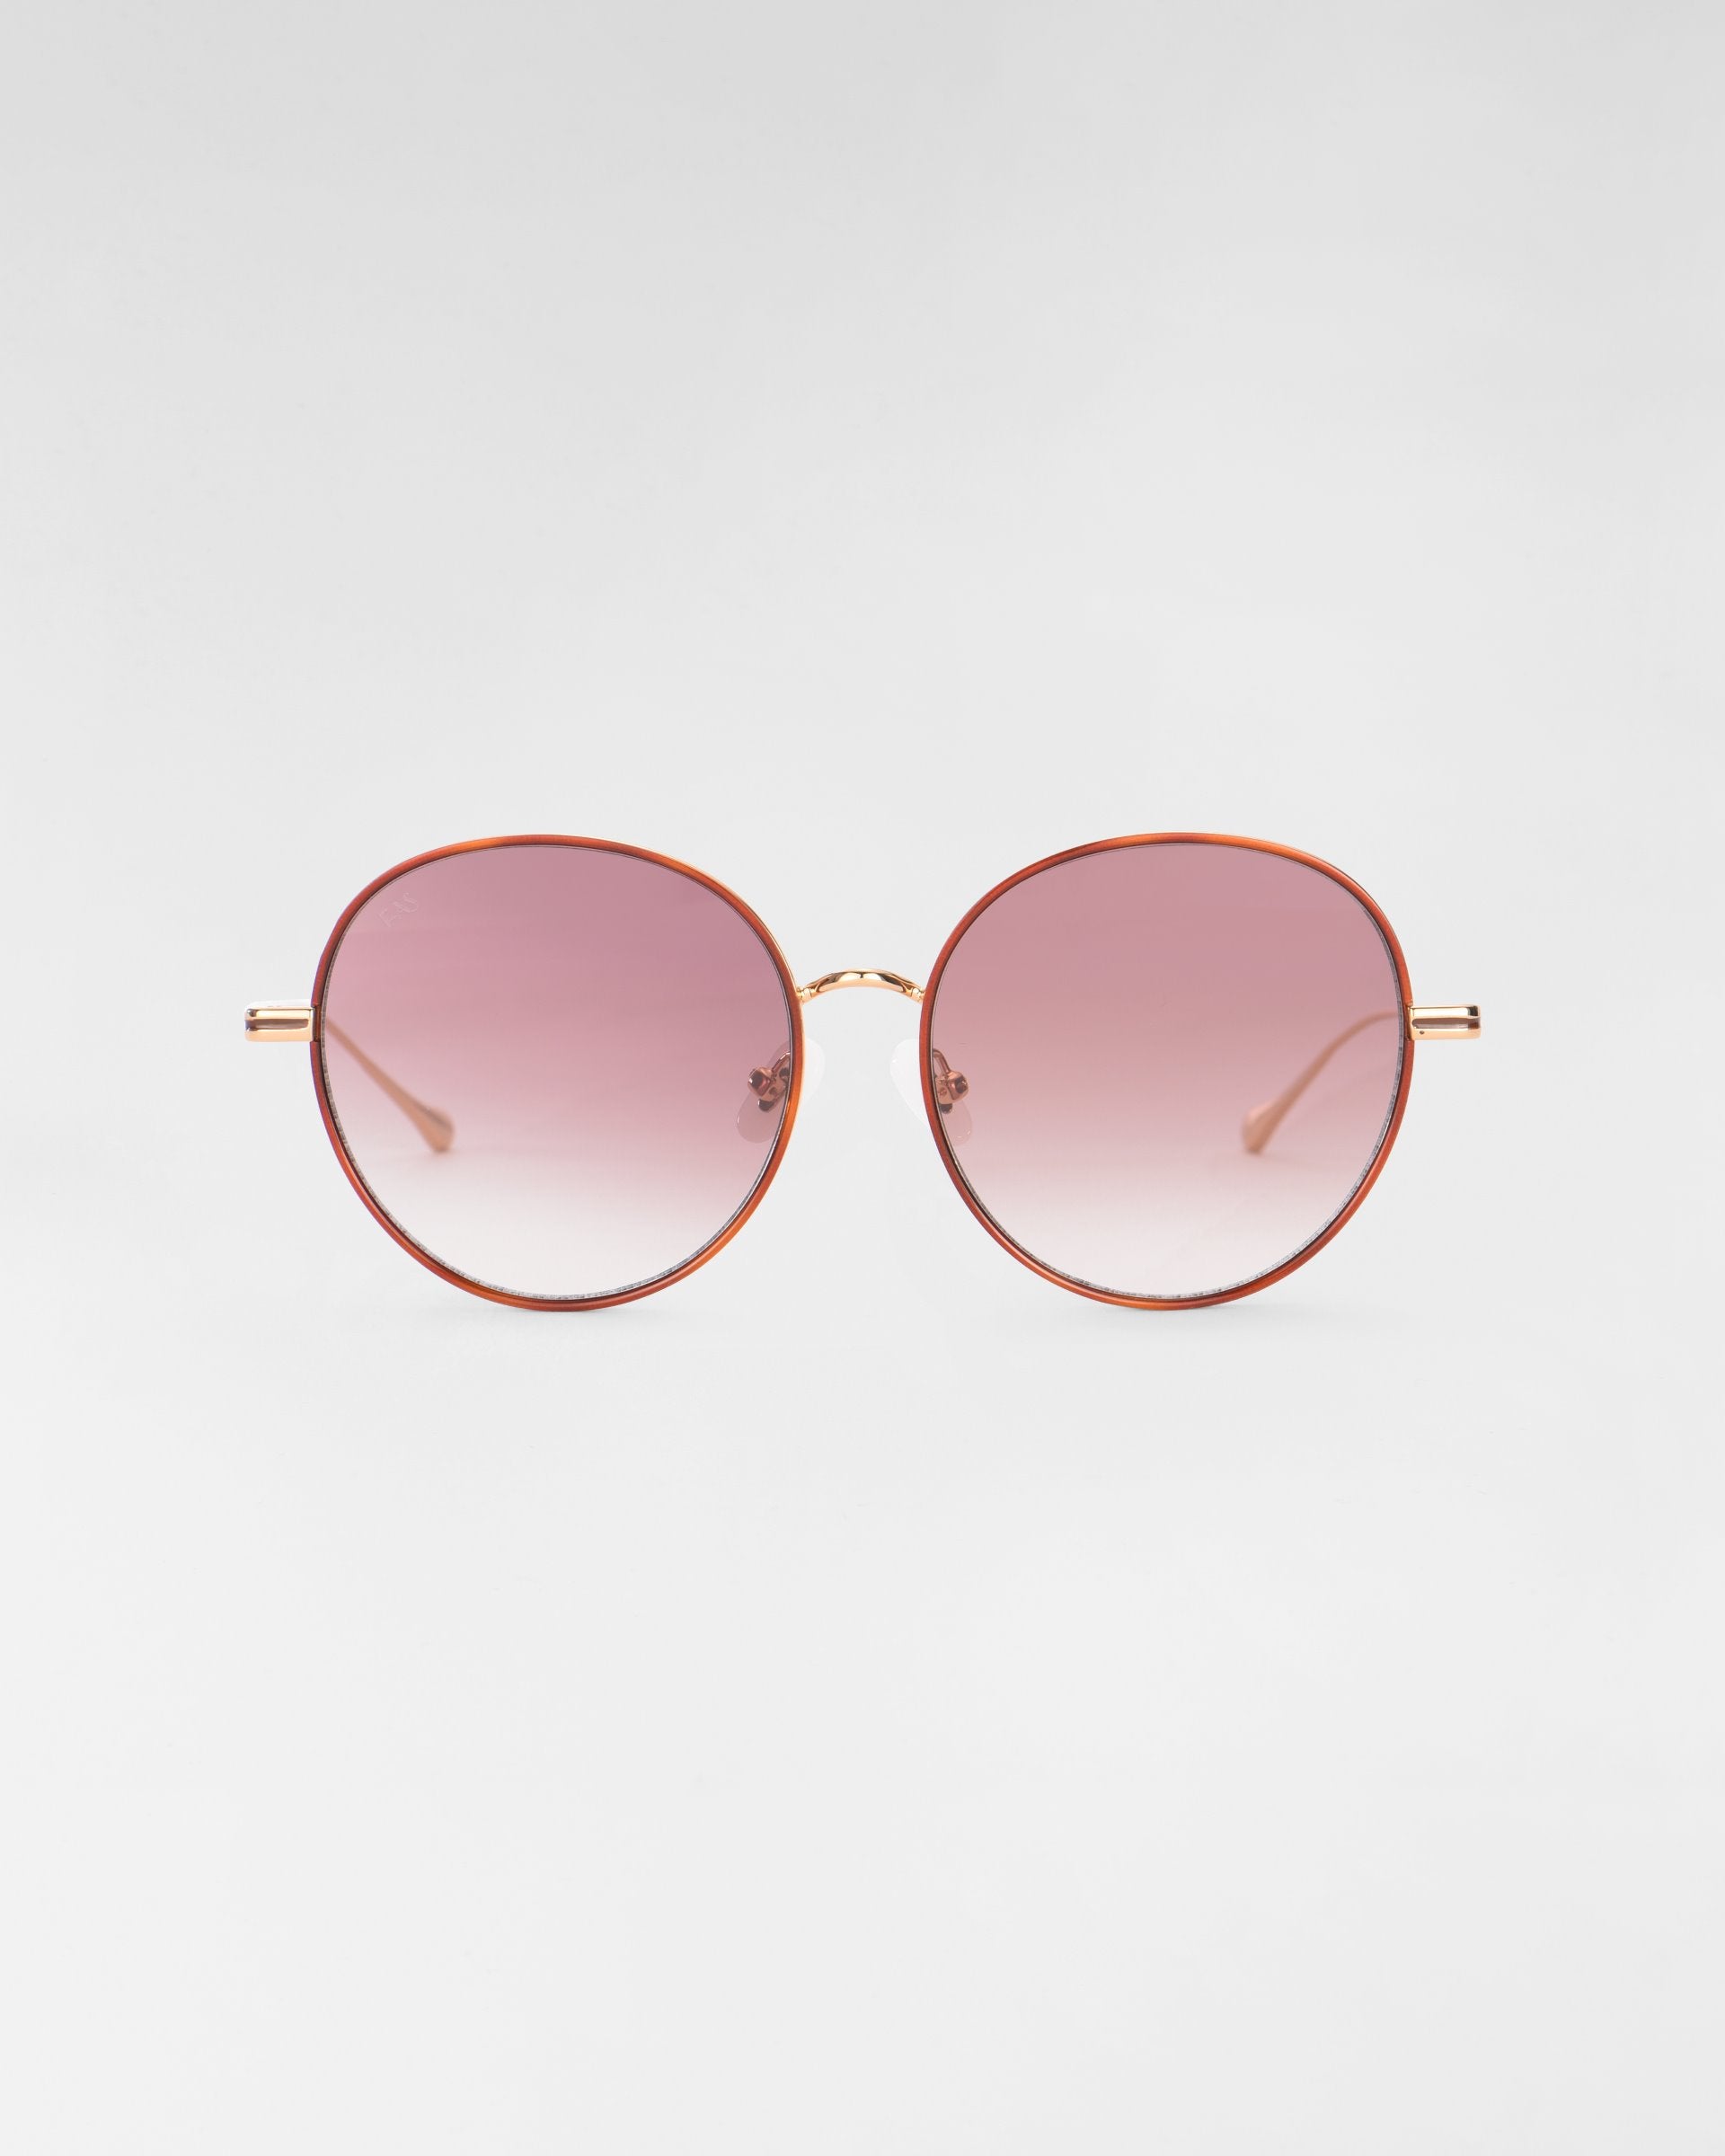 A pair of round Lemon sunglasses from For Art&#39;s Sake® with thin, metallic golden frames and pink-tinted gradient lenses, complemented by jadestone nose pads and 18-karat gold plating, set against a plain, light gray background.